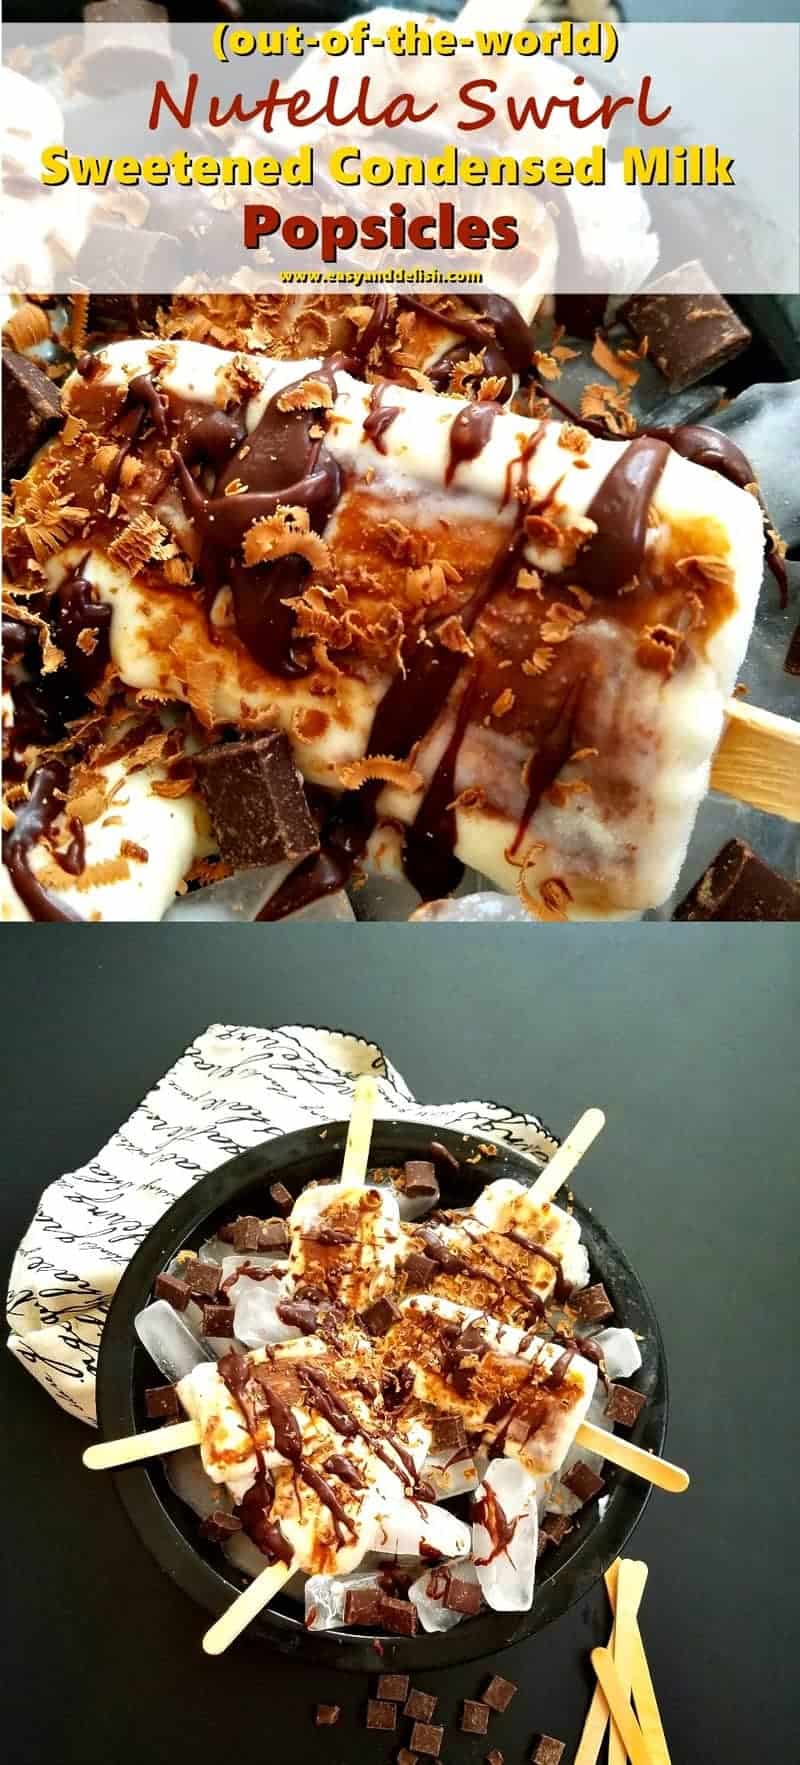 Nutella Swirl Sweetened Condensed Milk Popsicles - Easy and Delish